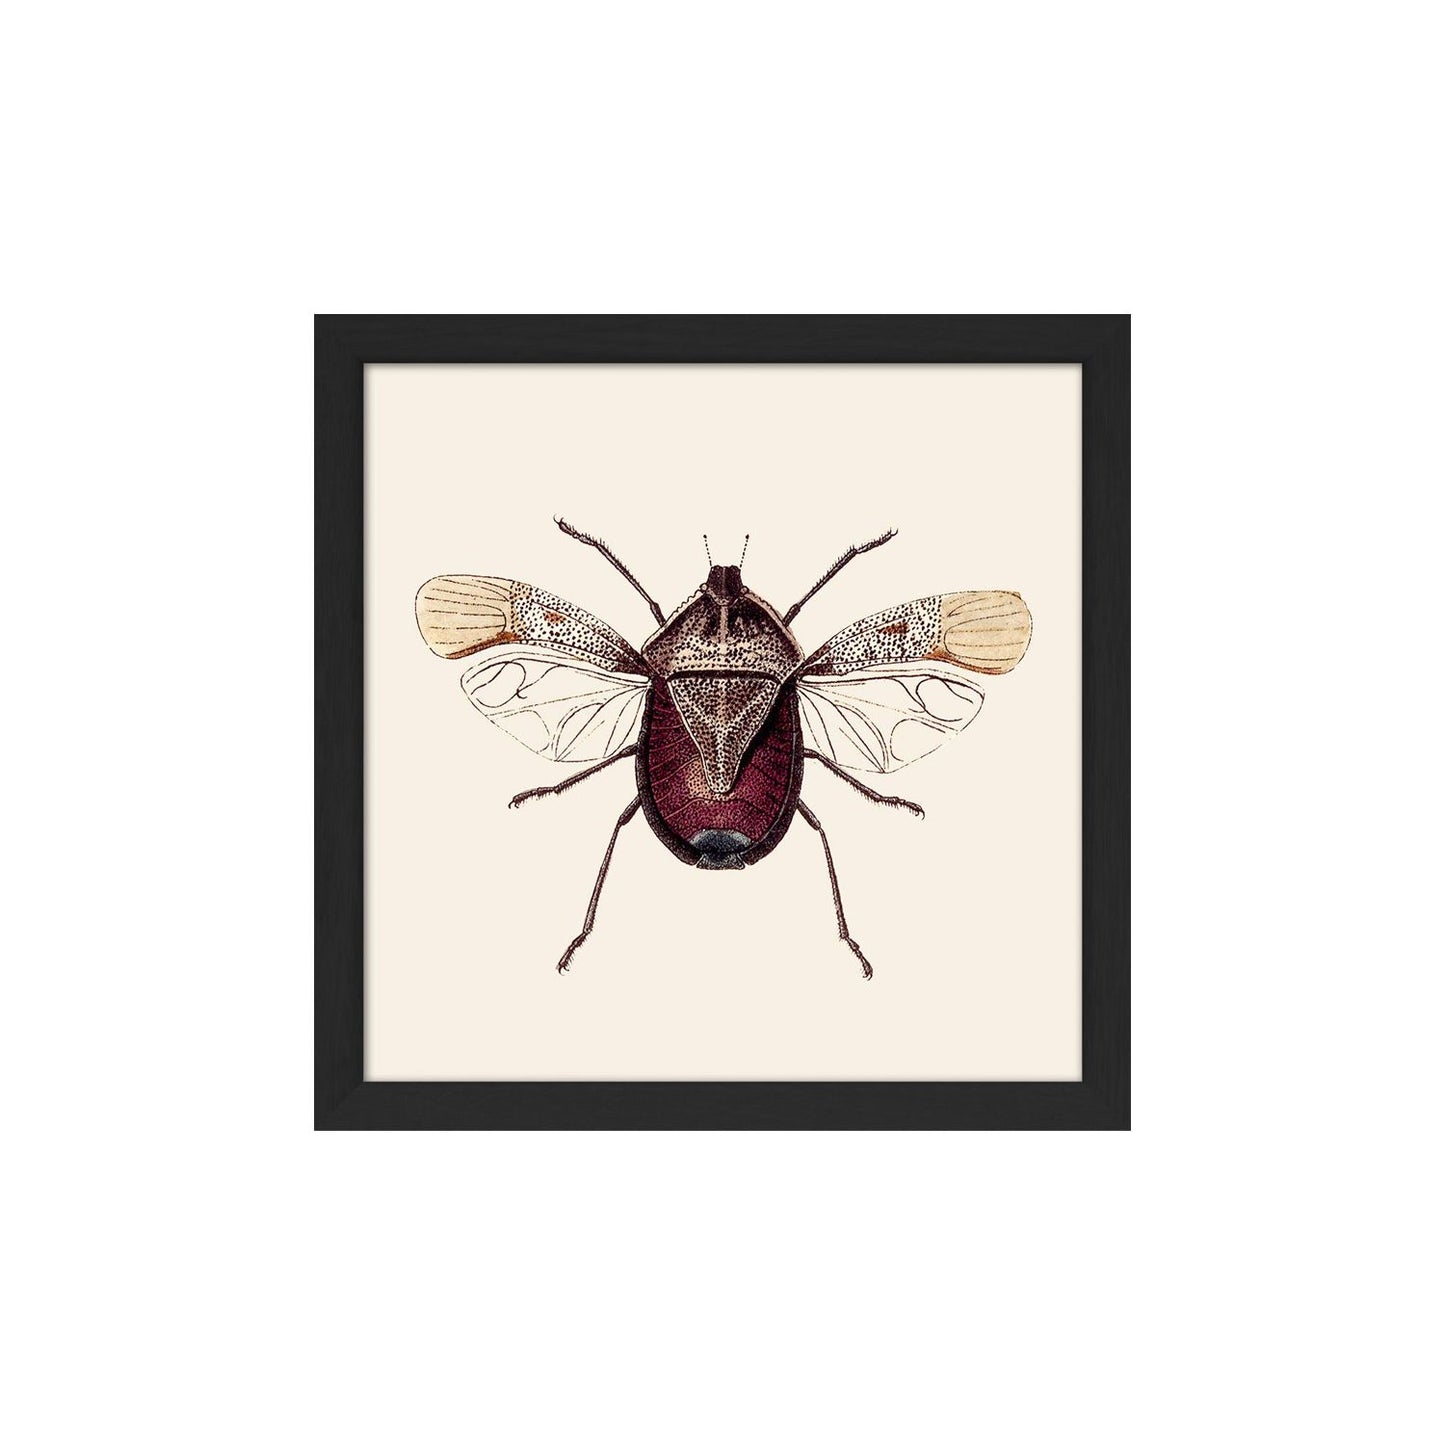 No. SQ119 Dark Red Insect With Black Frame - 15cm x 15cm